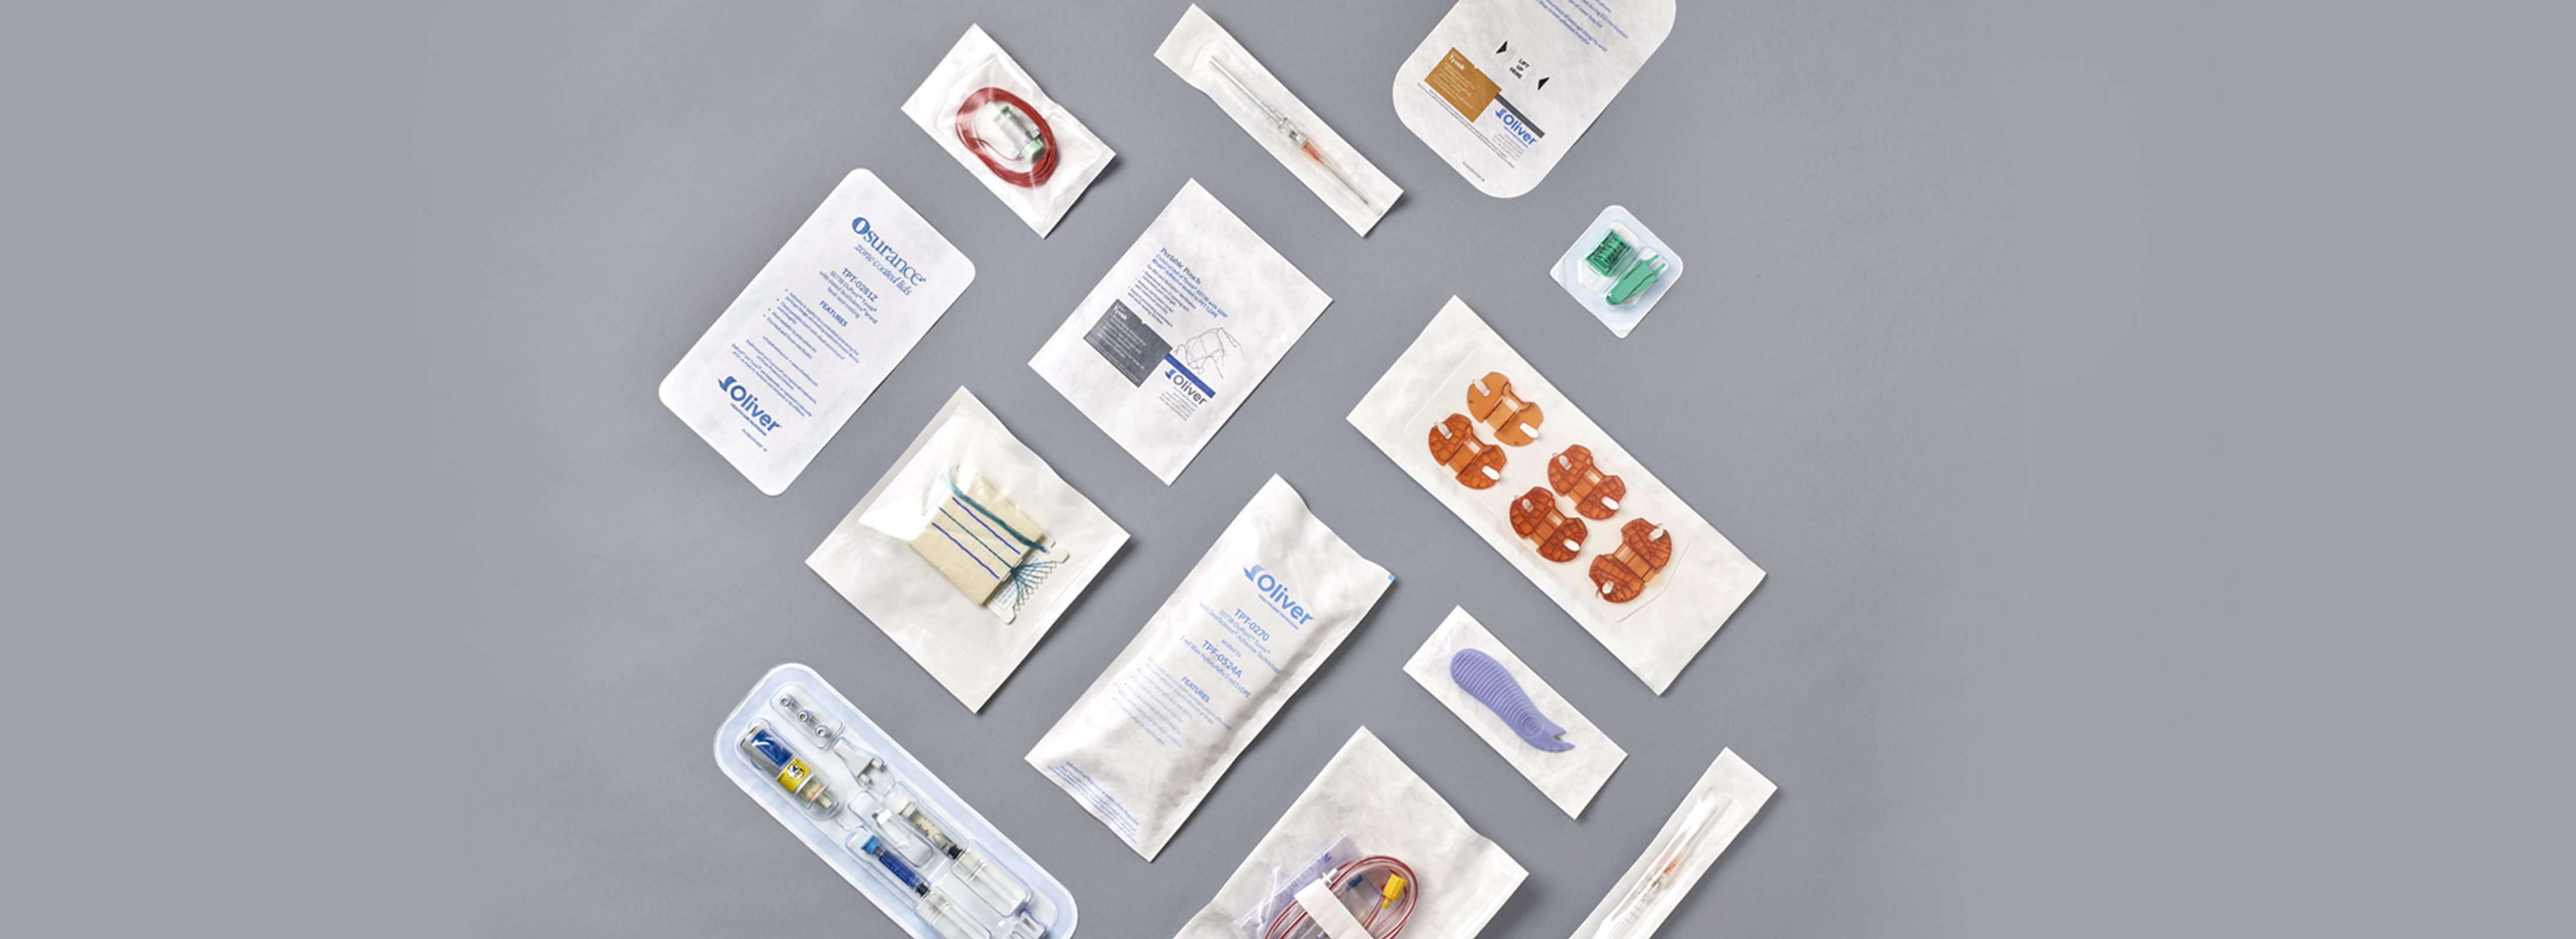 Heat Sealable Healthcare Packaging Adhesives | Oliver Healthcare Packaging